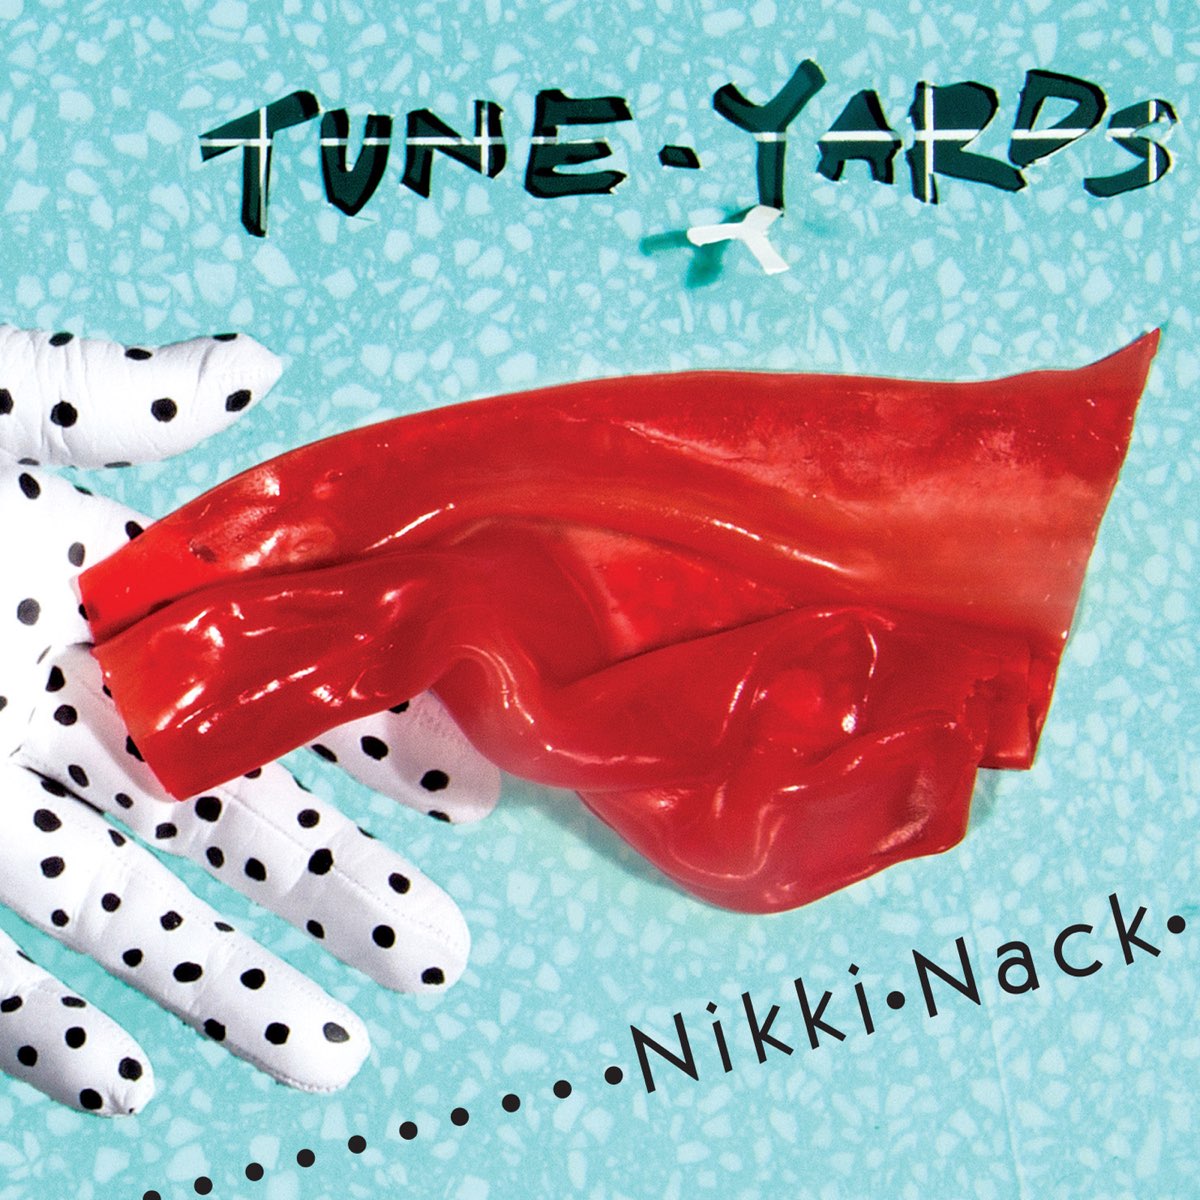 10 years ago today, @tuneyards released “Nikki Nack” (@4AD_Official). Finding new ways. Read our review of 2018’s essential “I Can Feel You Creep Into My Private Life”: magnetmagazine.com/2018/06/09/ess…